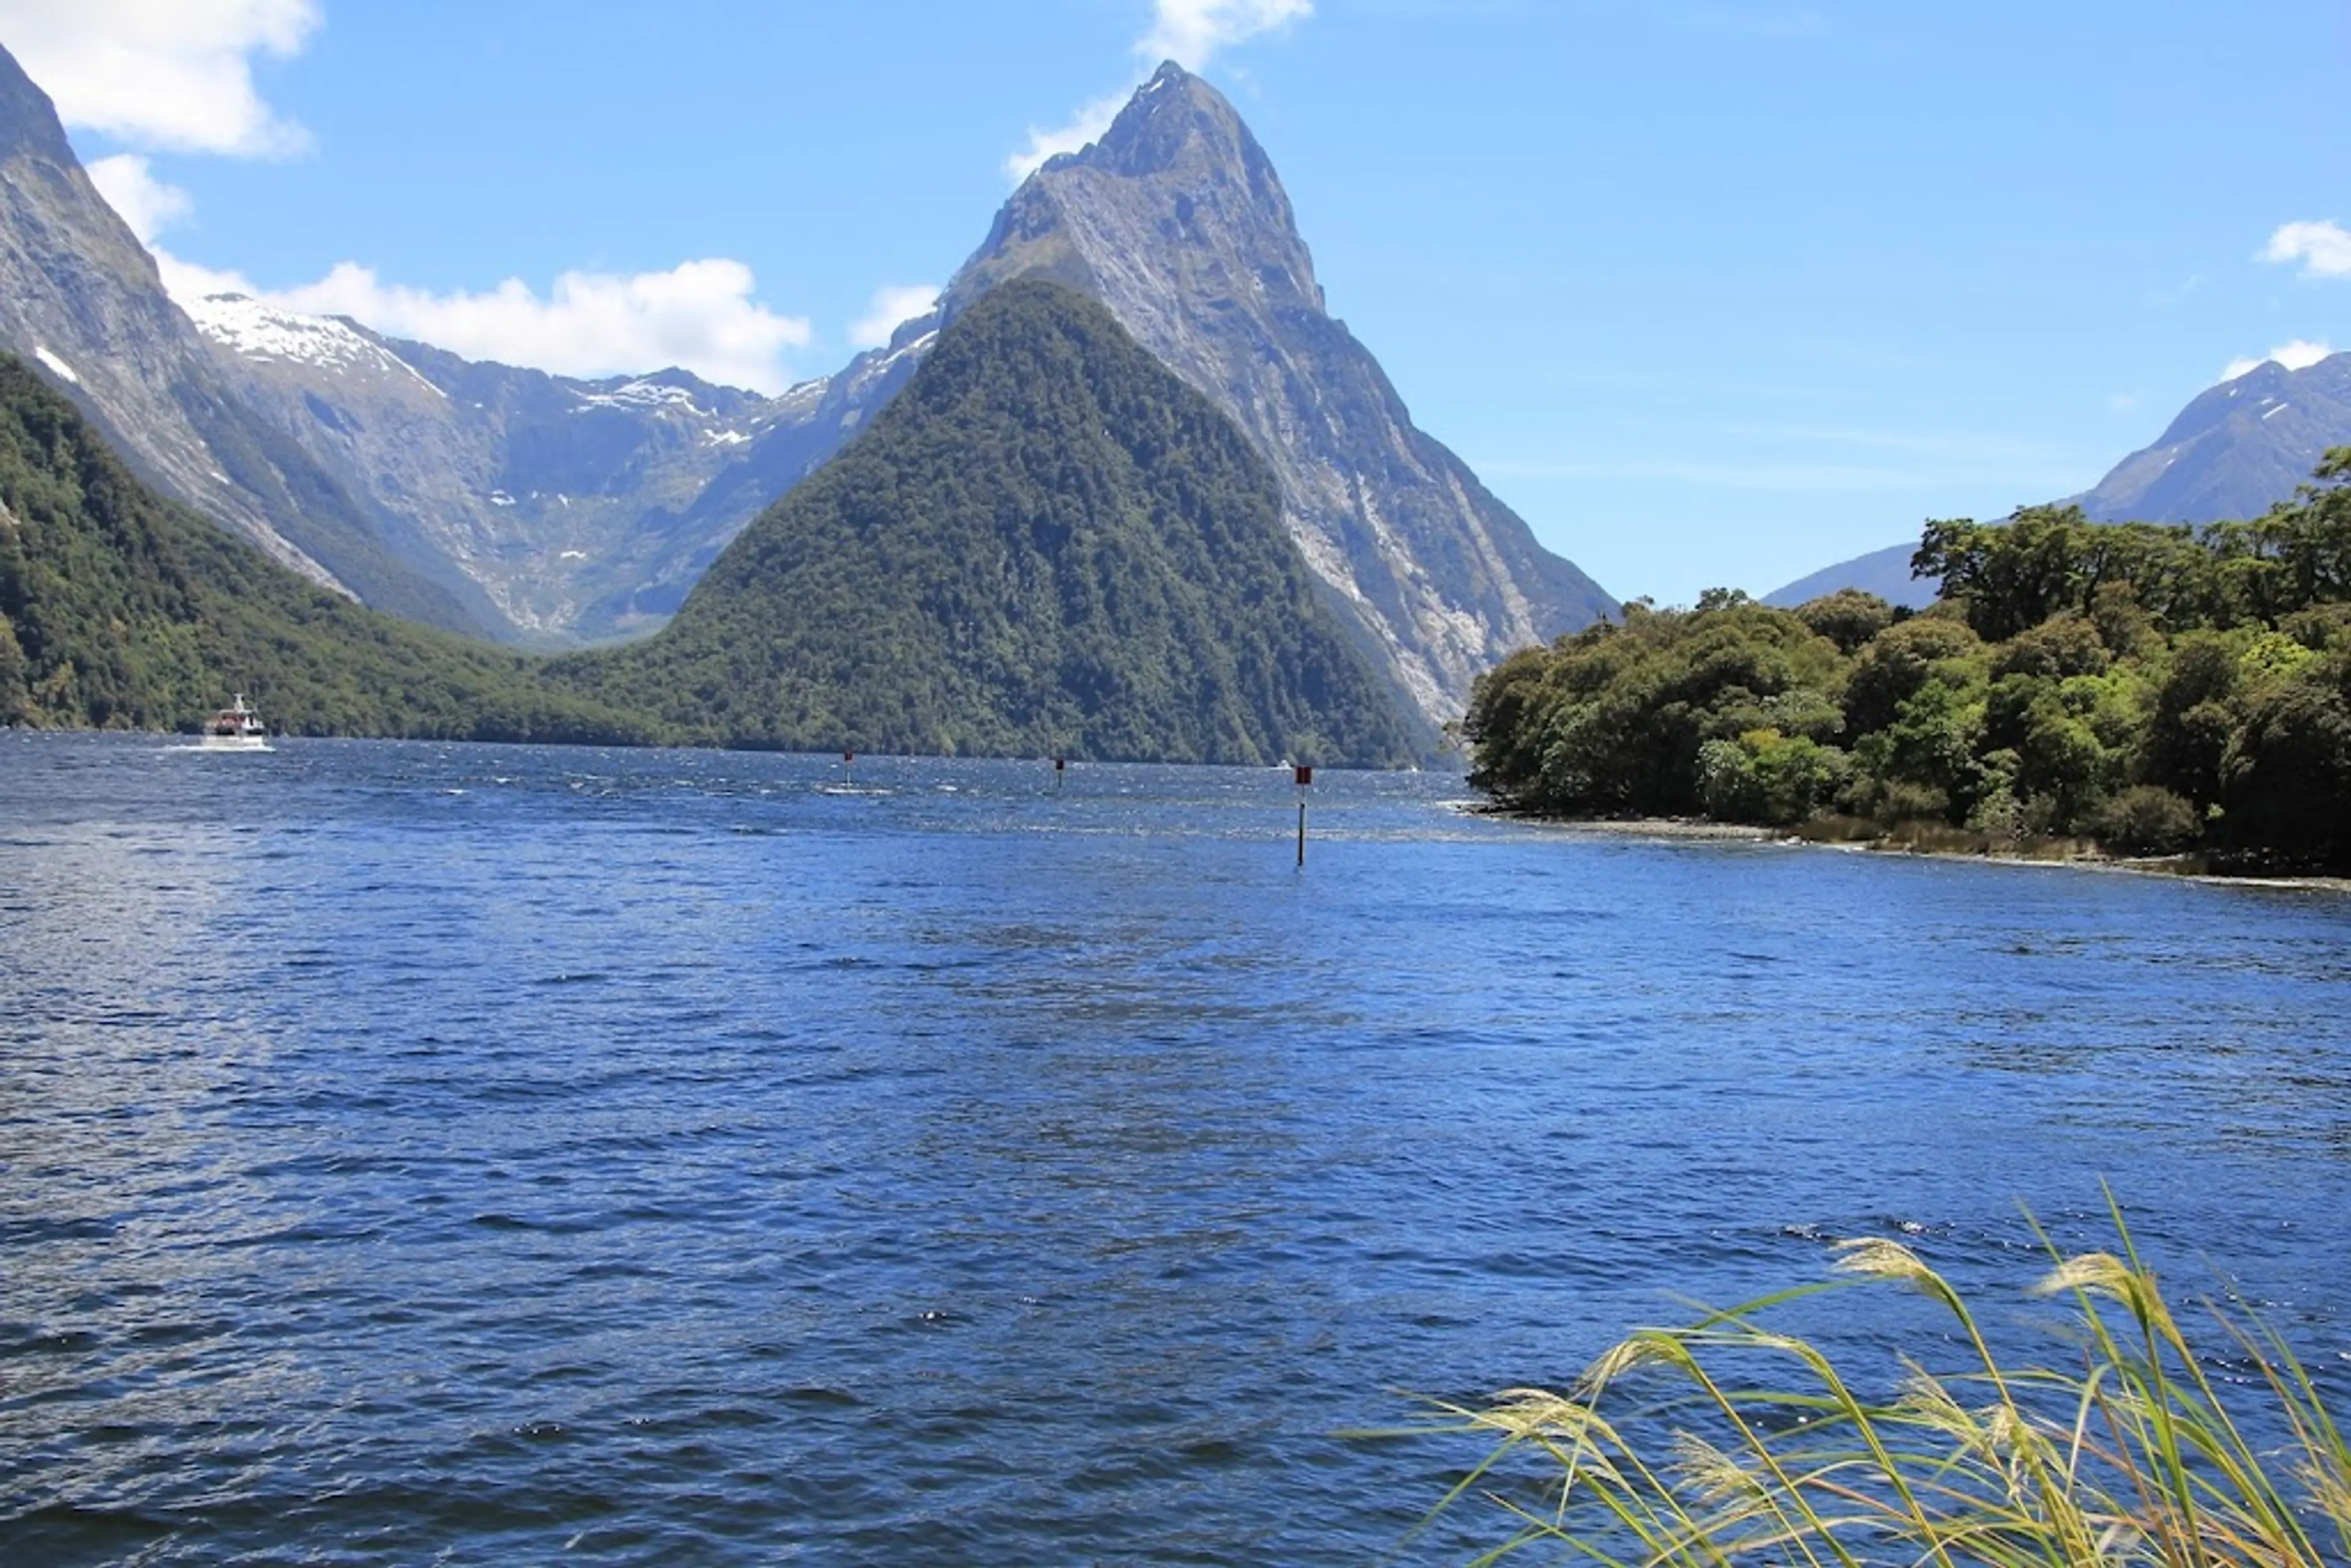 Guided night walk in Fiordland National Park